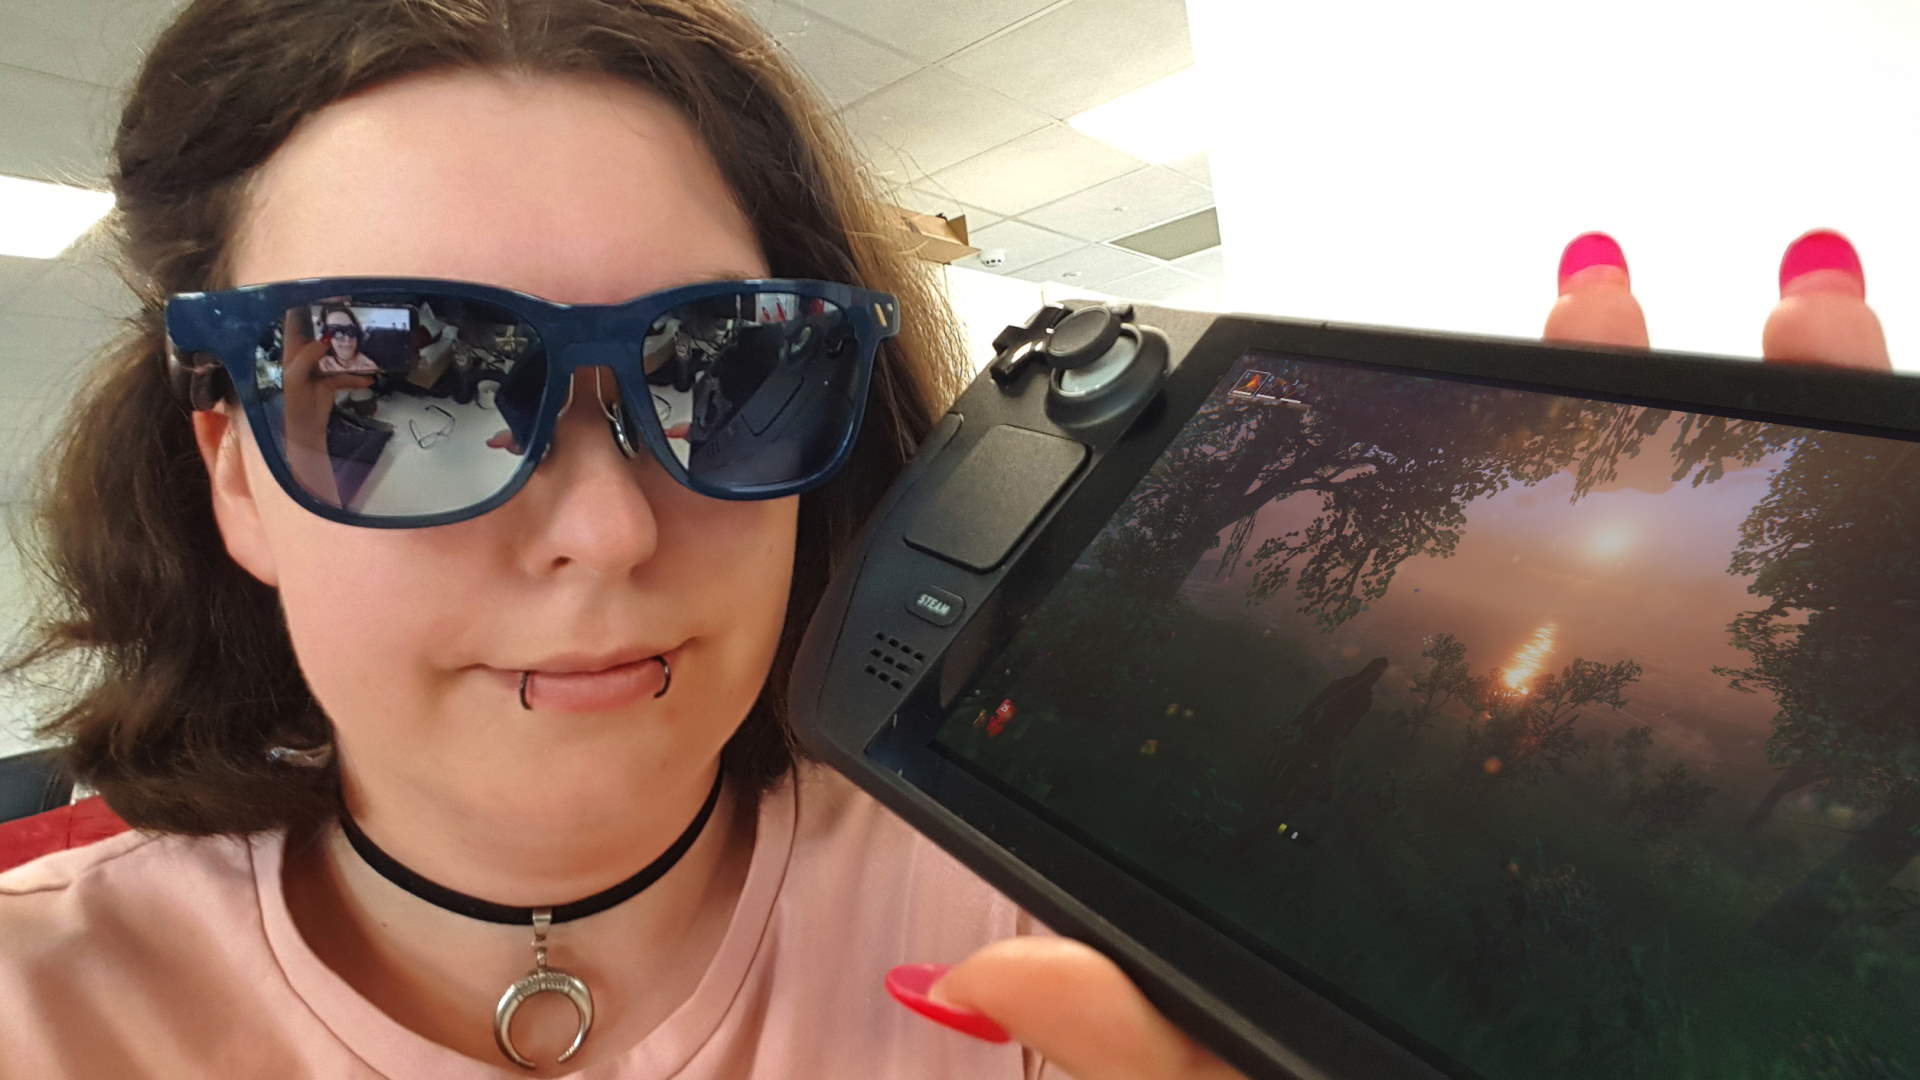  So, I just spent my day playing Valheim through these weird-ass prototype XR glasses 